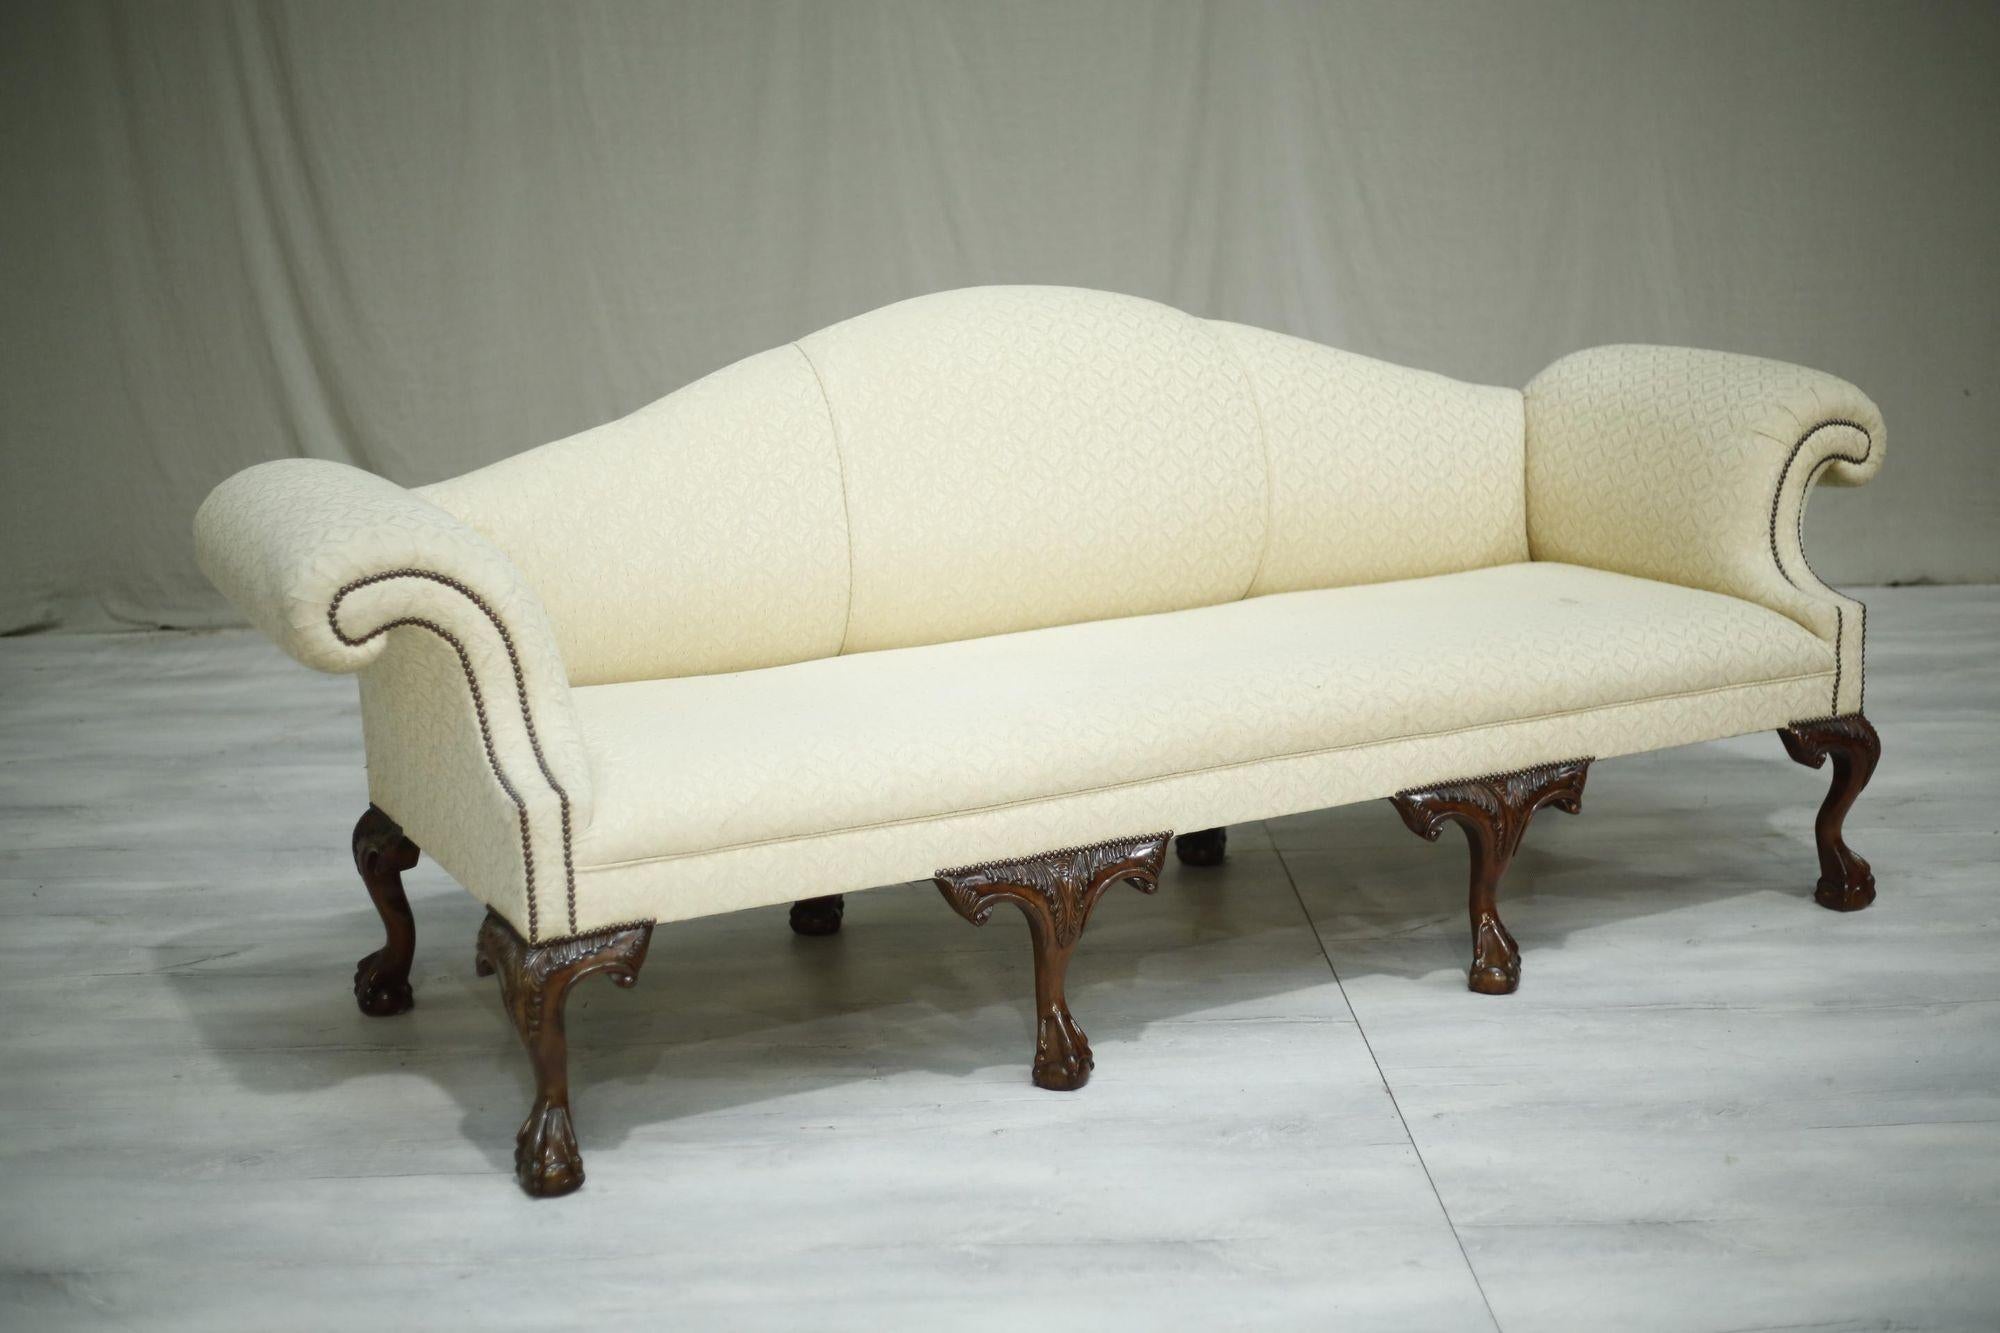 All my armchairs and sofas have been fully restored, springs, legs, padding etc so these will stand the test of time even if used everyday.

This is a very elegant 20th century Georgian style camel backed sofa of huge proportions. It has strong